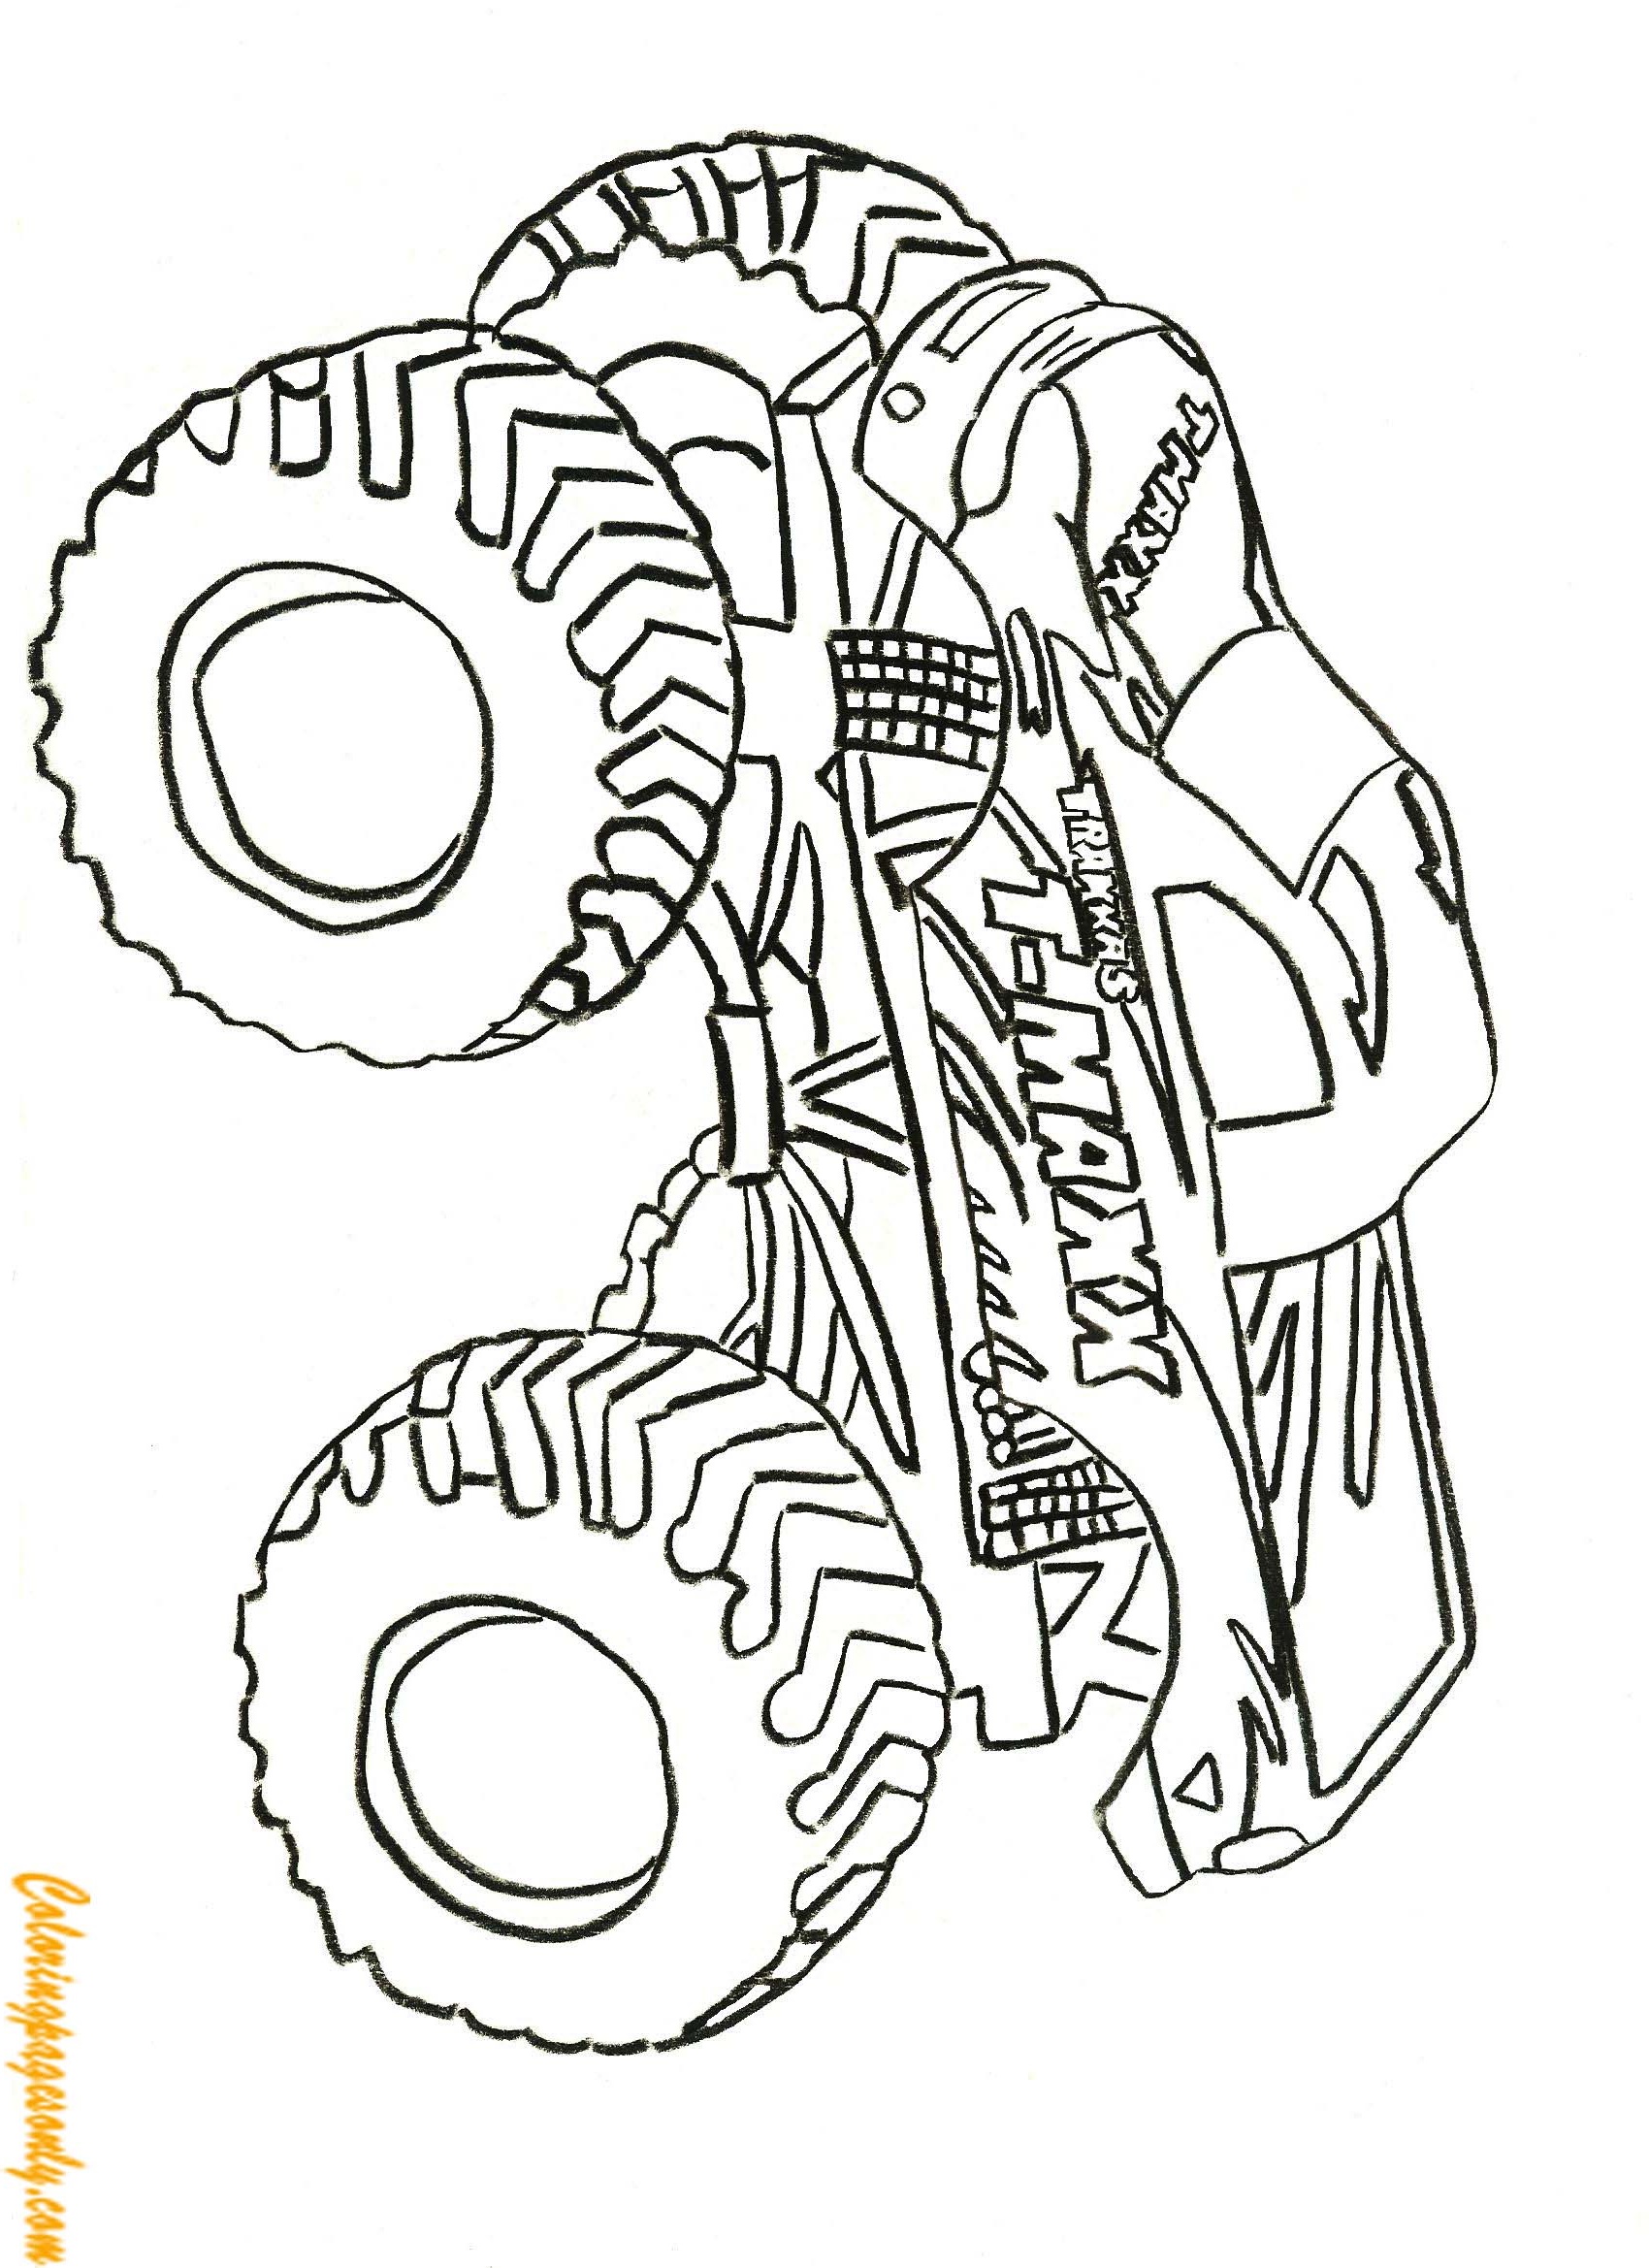 Traxxas T Maxx Monster Truck Coloring Page   Free Coloring Pages Online